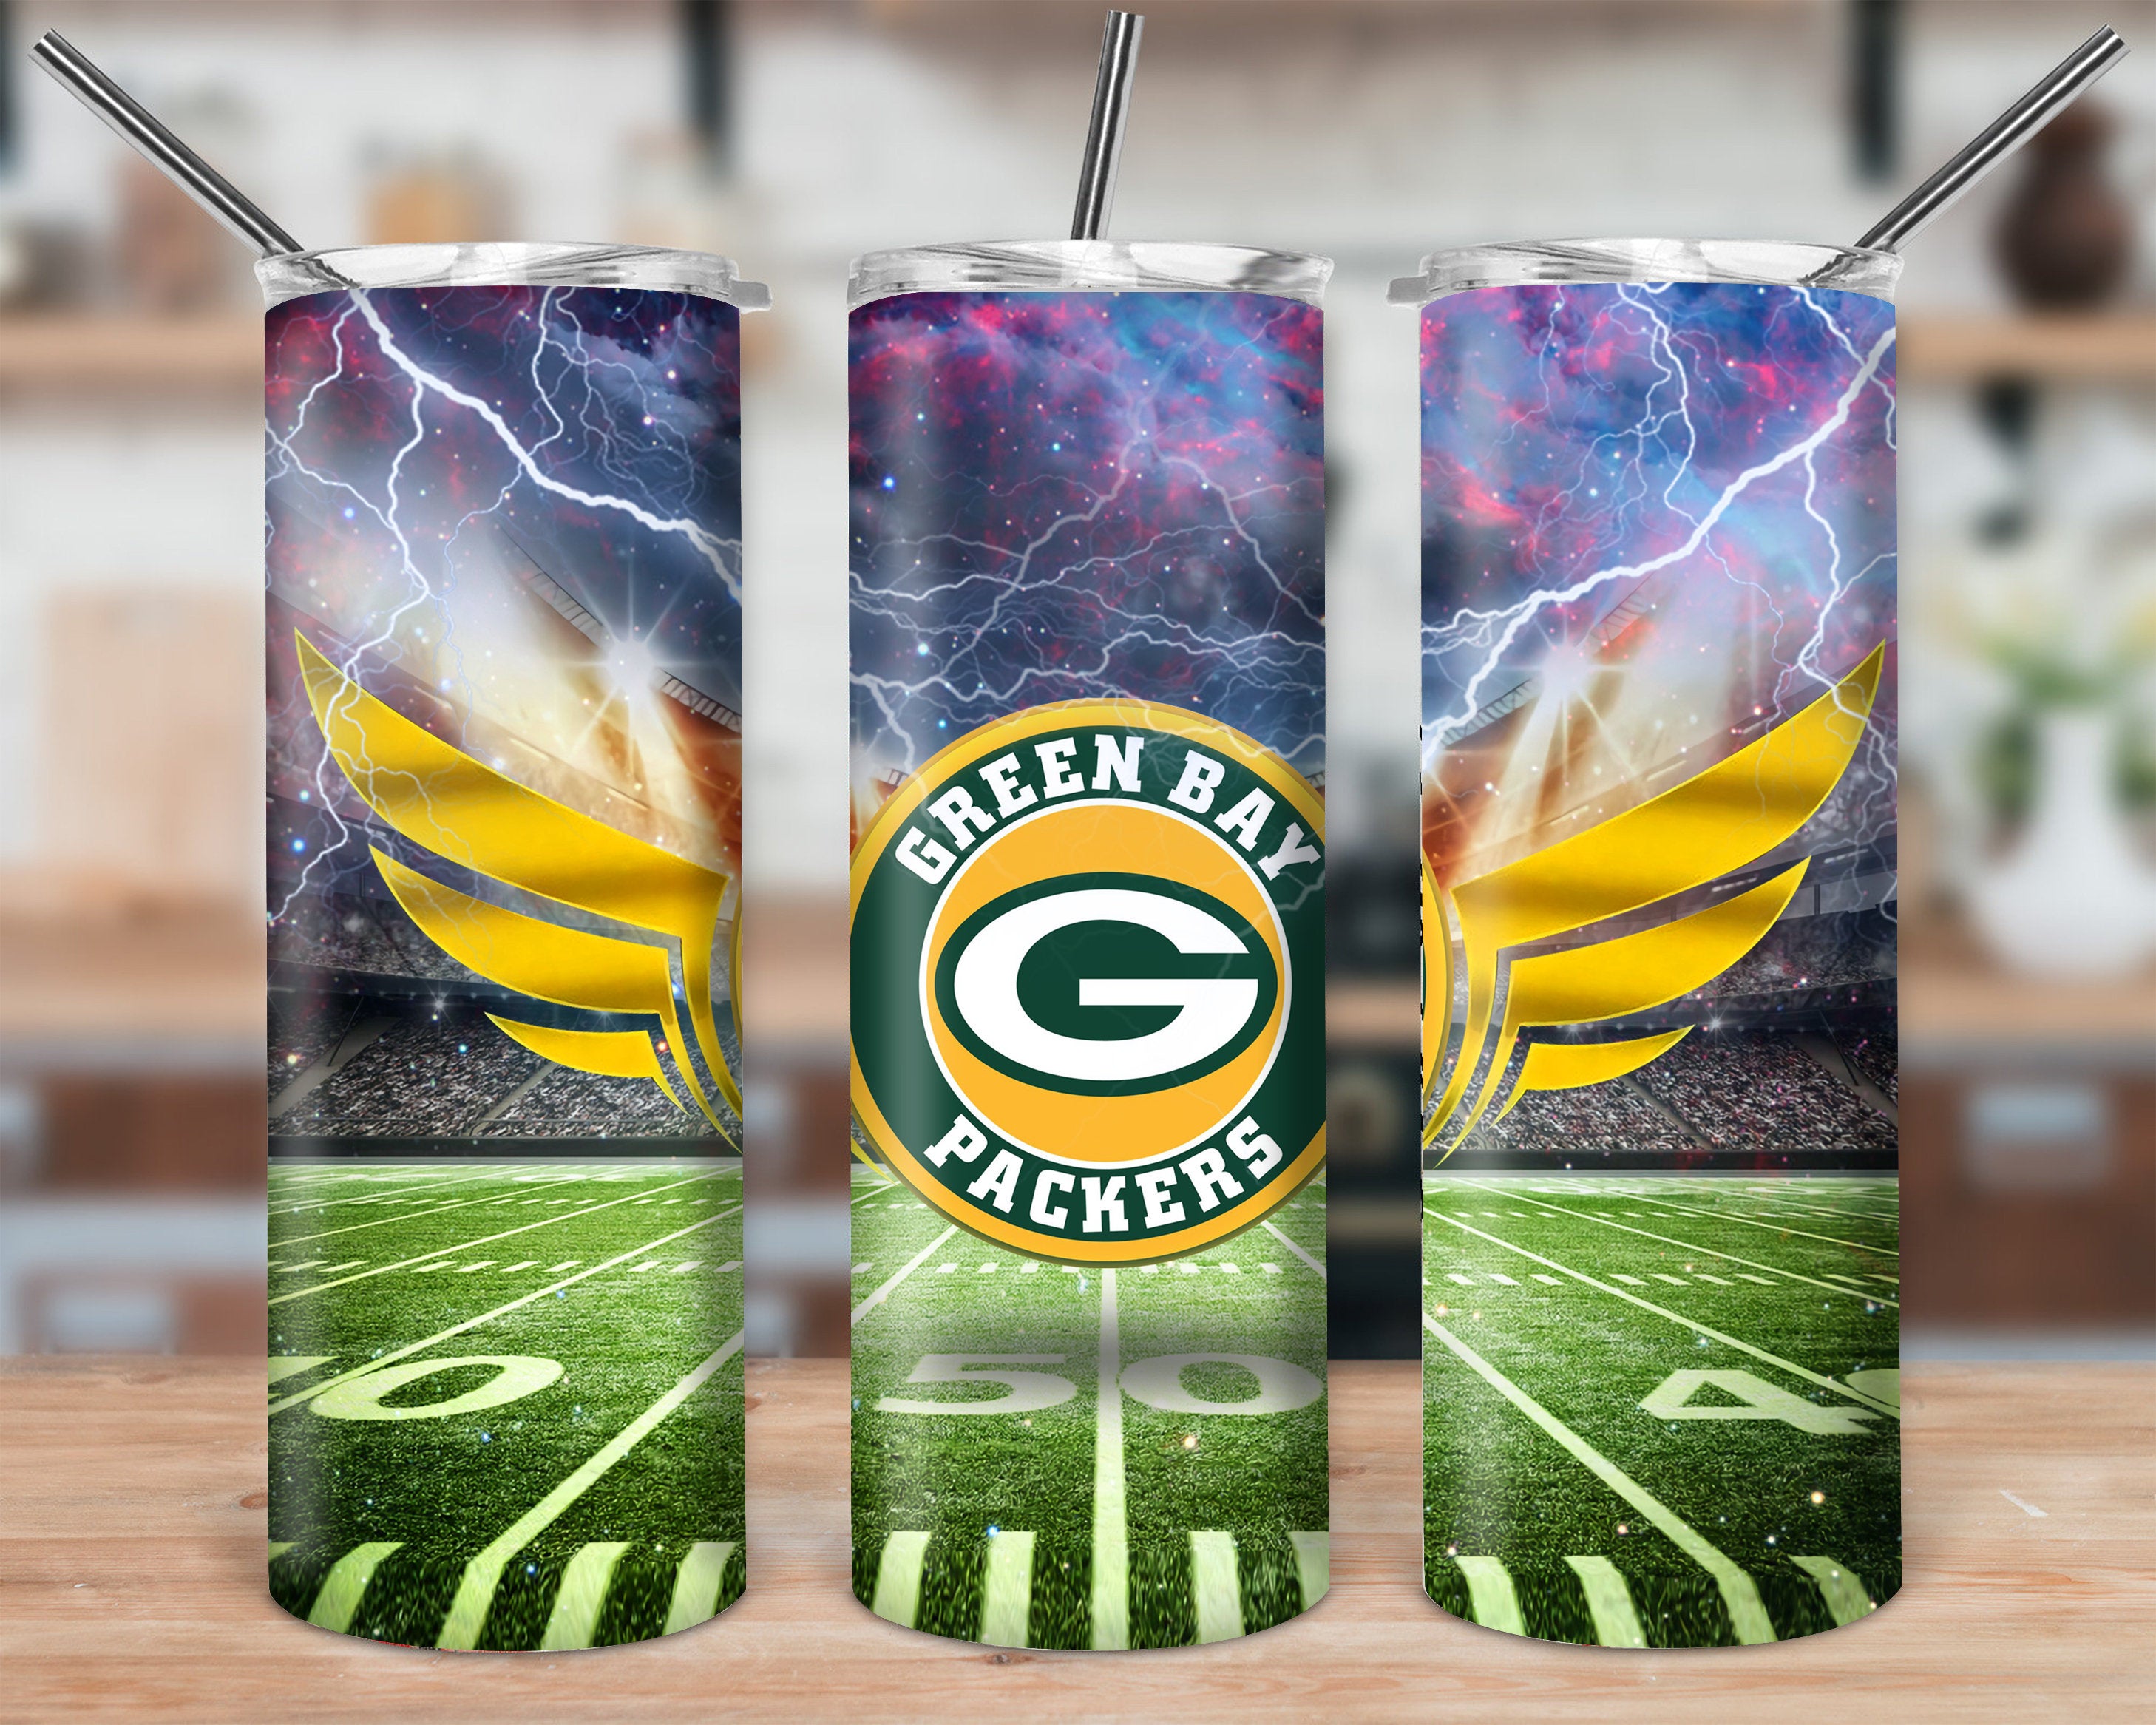 Logo Chair 20 oz Green Bay Packers Native Stainless Tumbler - 612-S20T-63